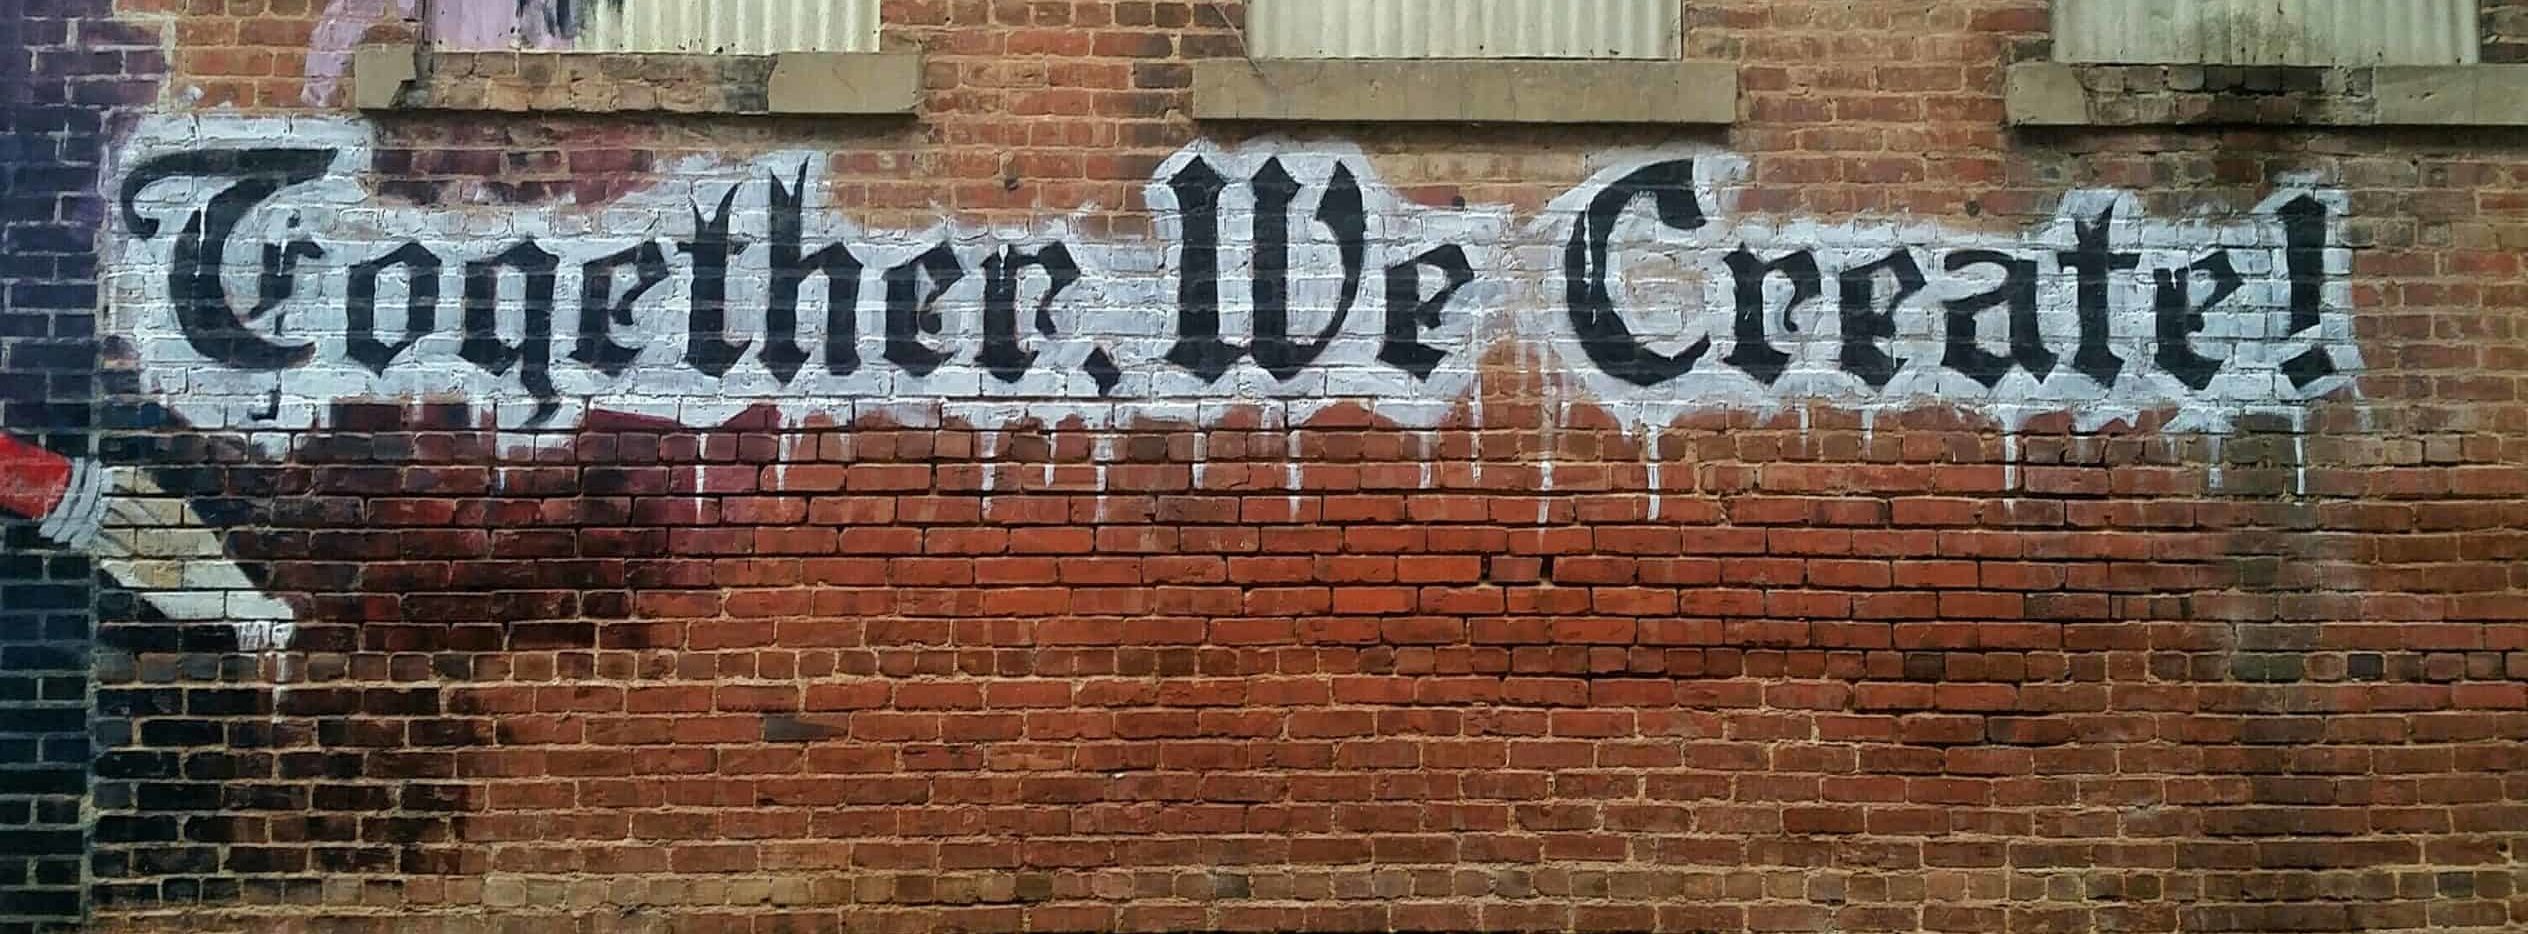 graffiti on a brick wall that says "Together we create"